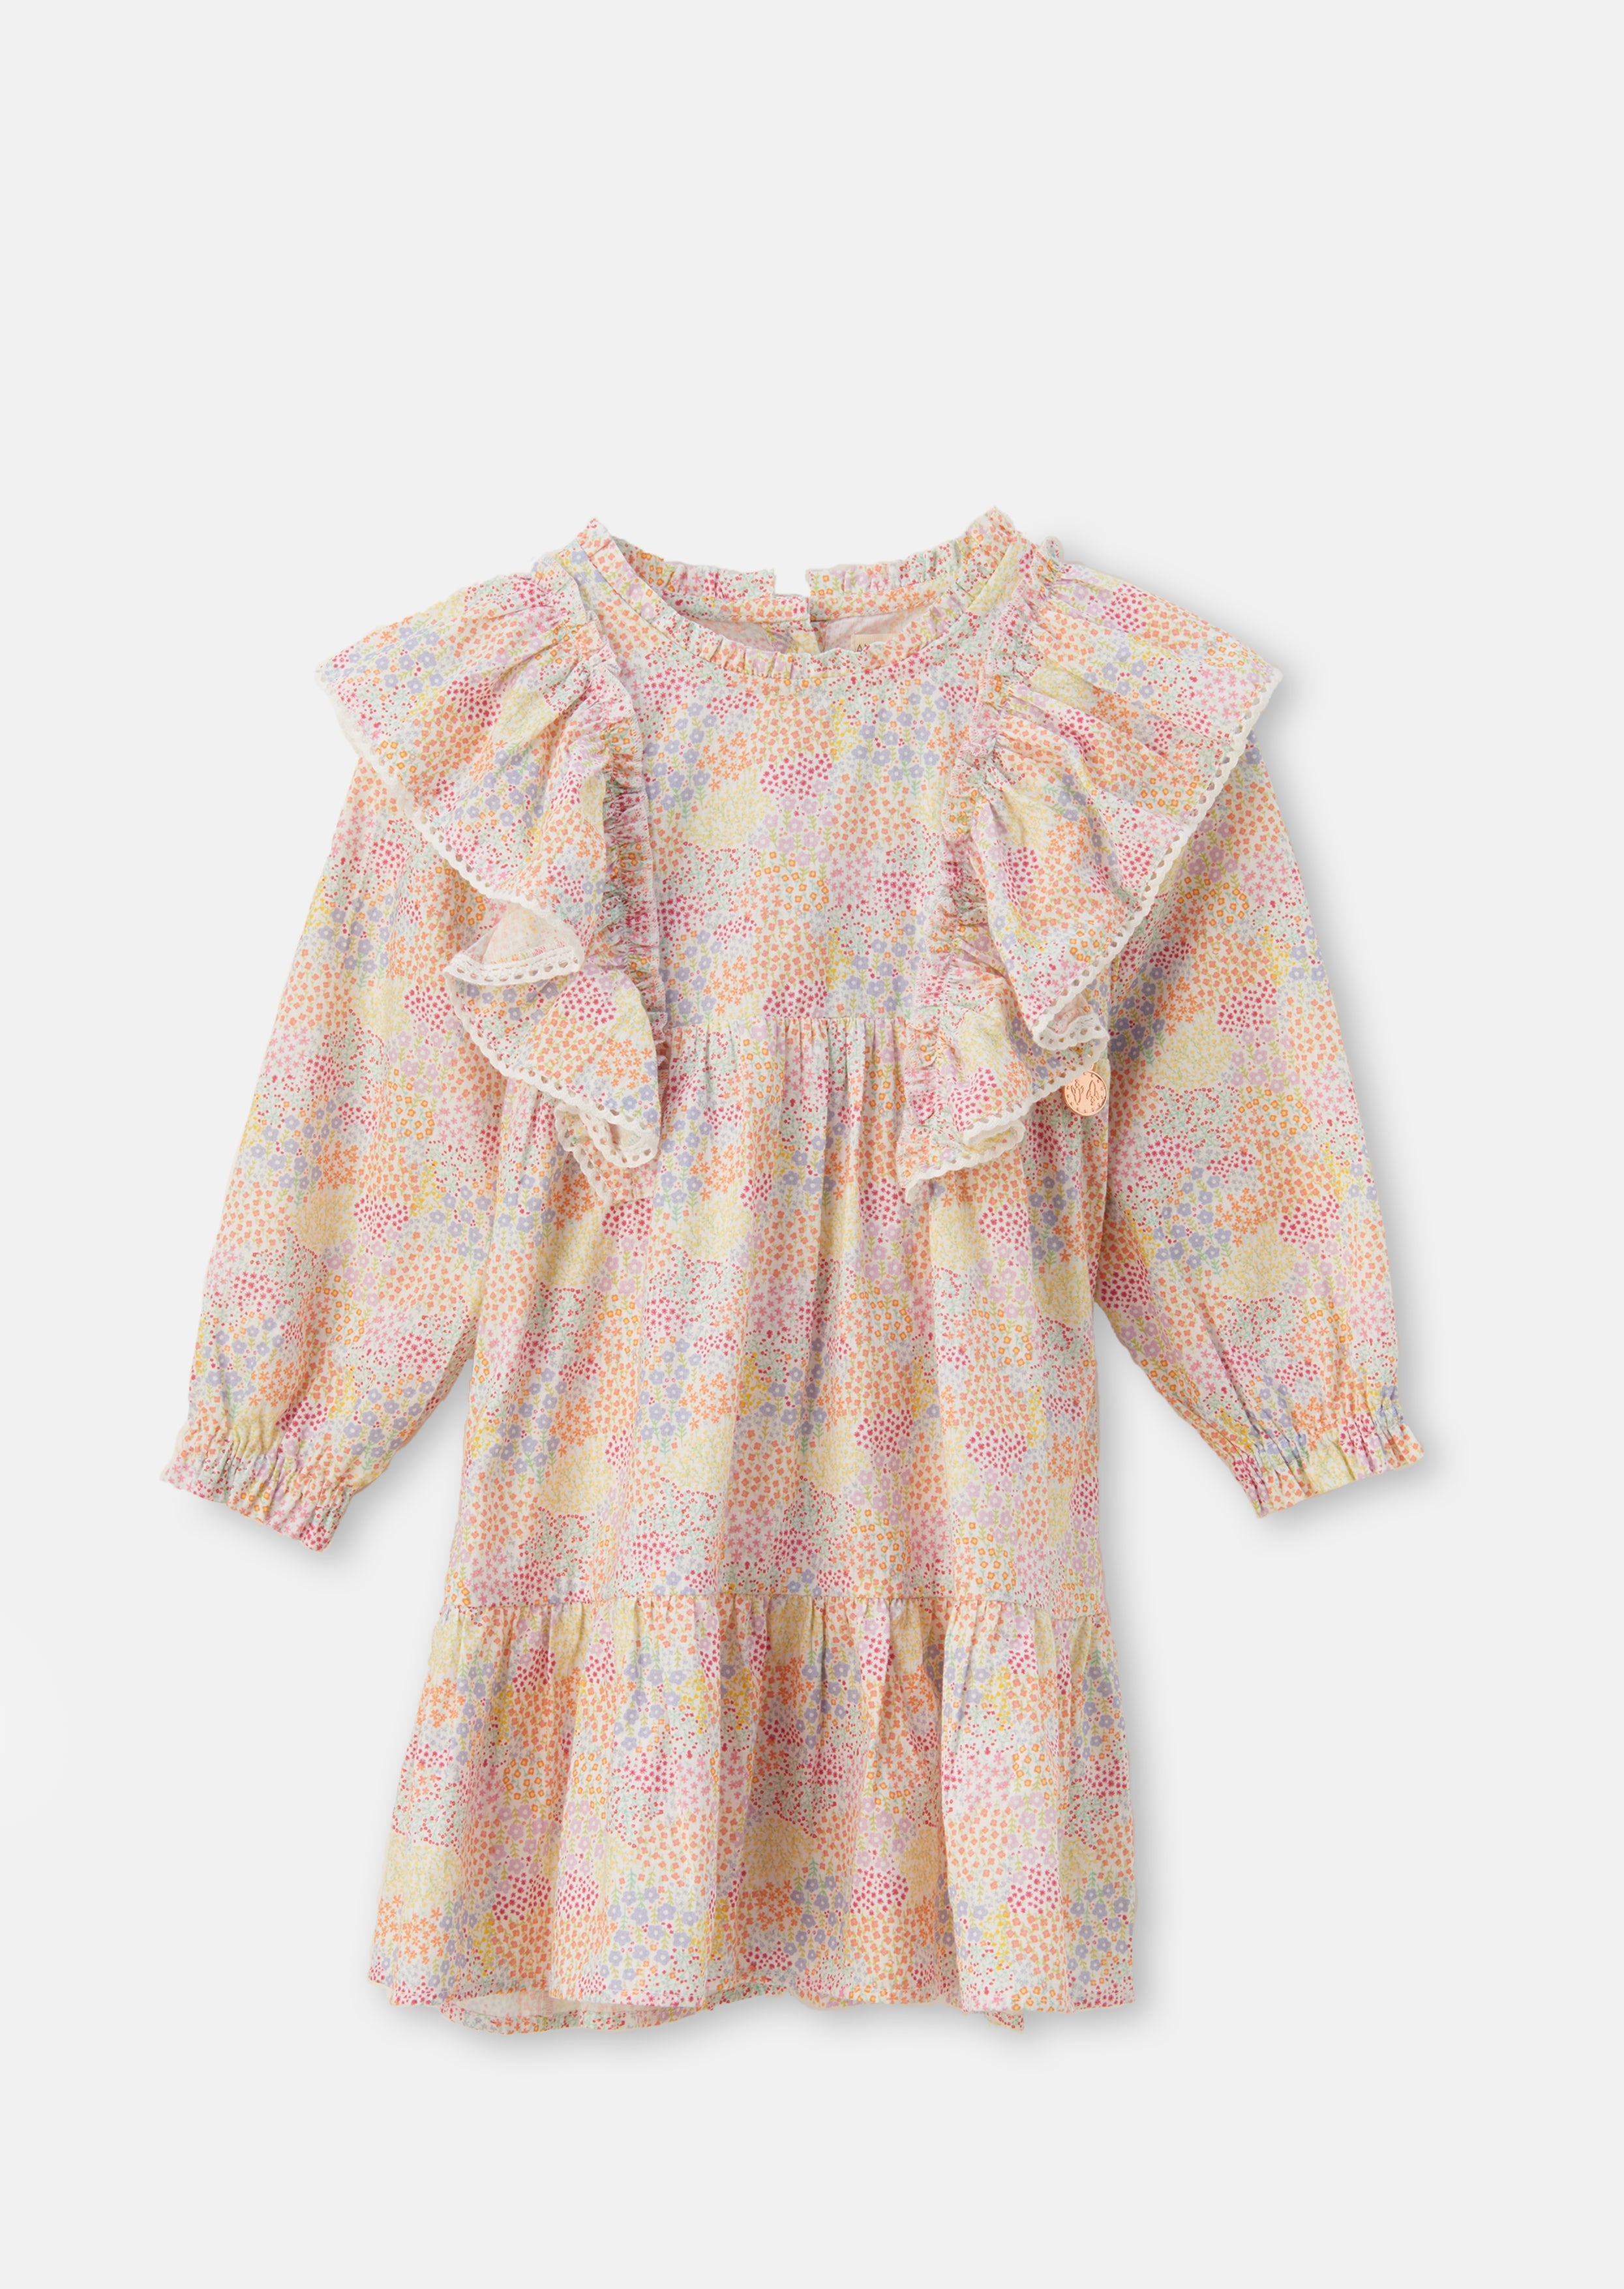 Baby Girl Floral Printed Cotton Pink Rainbow Dress